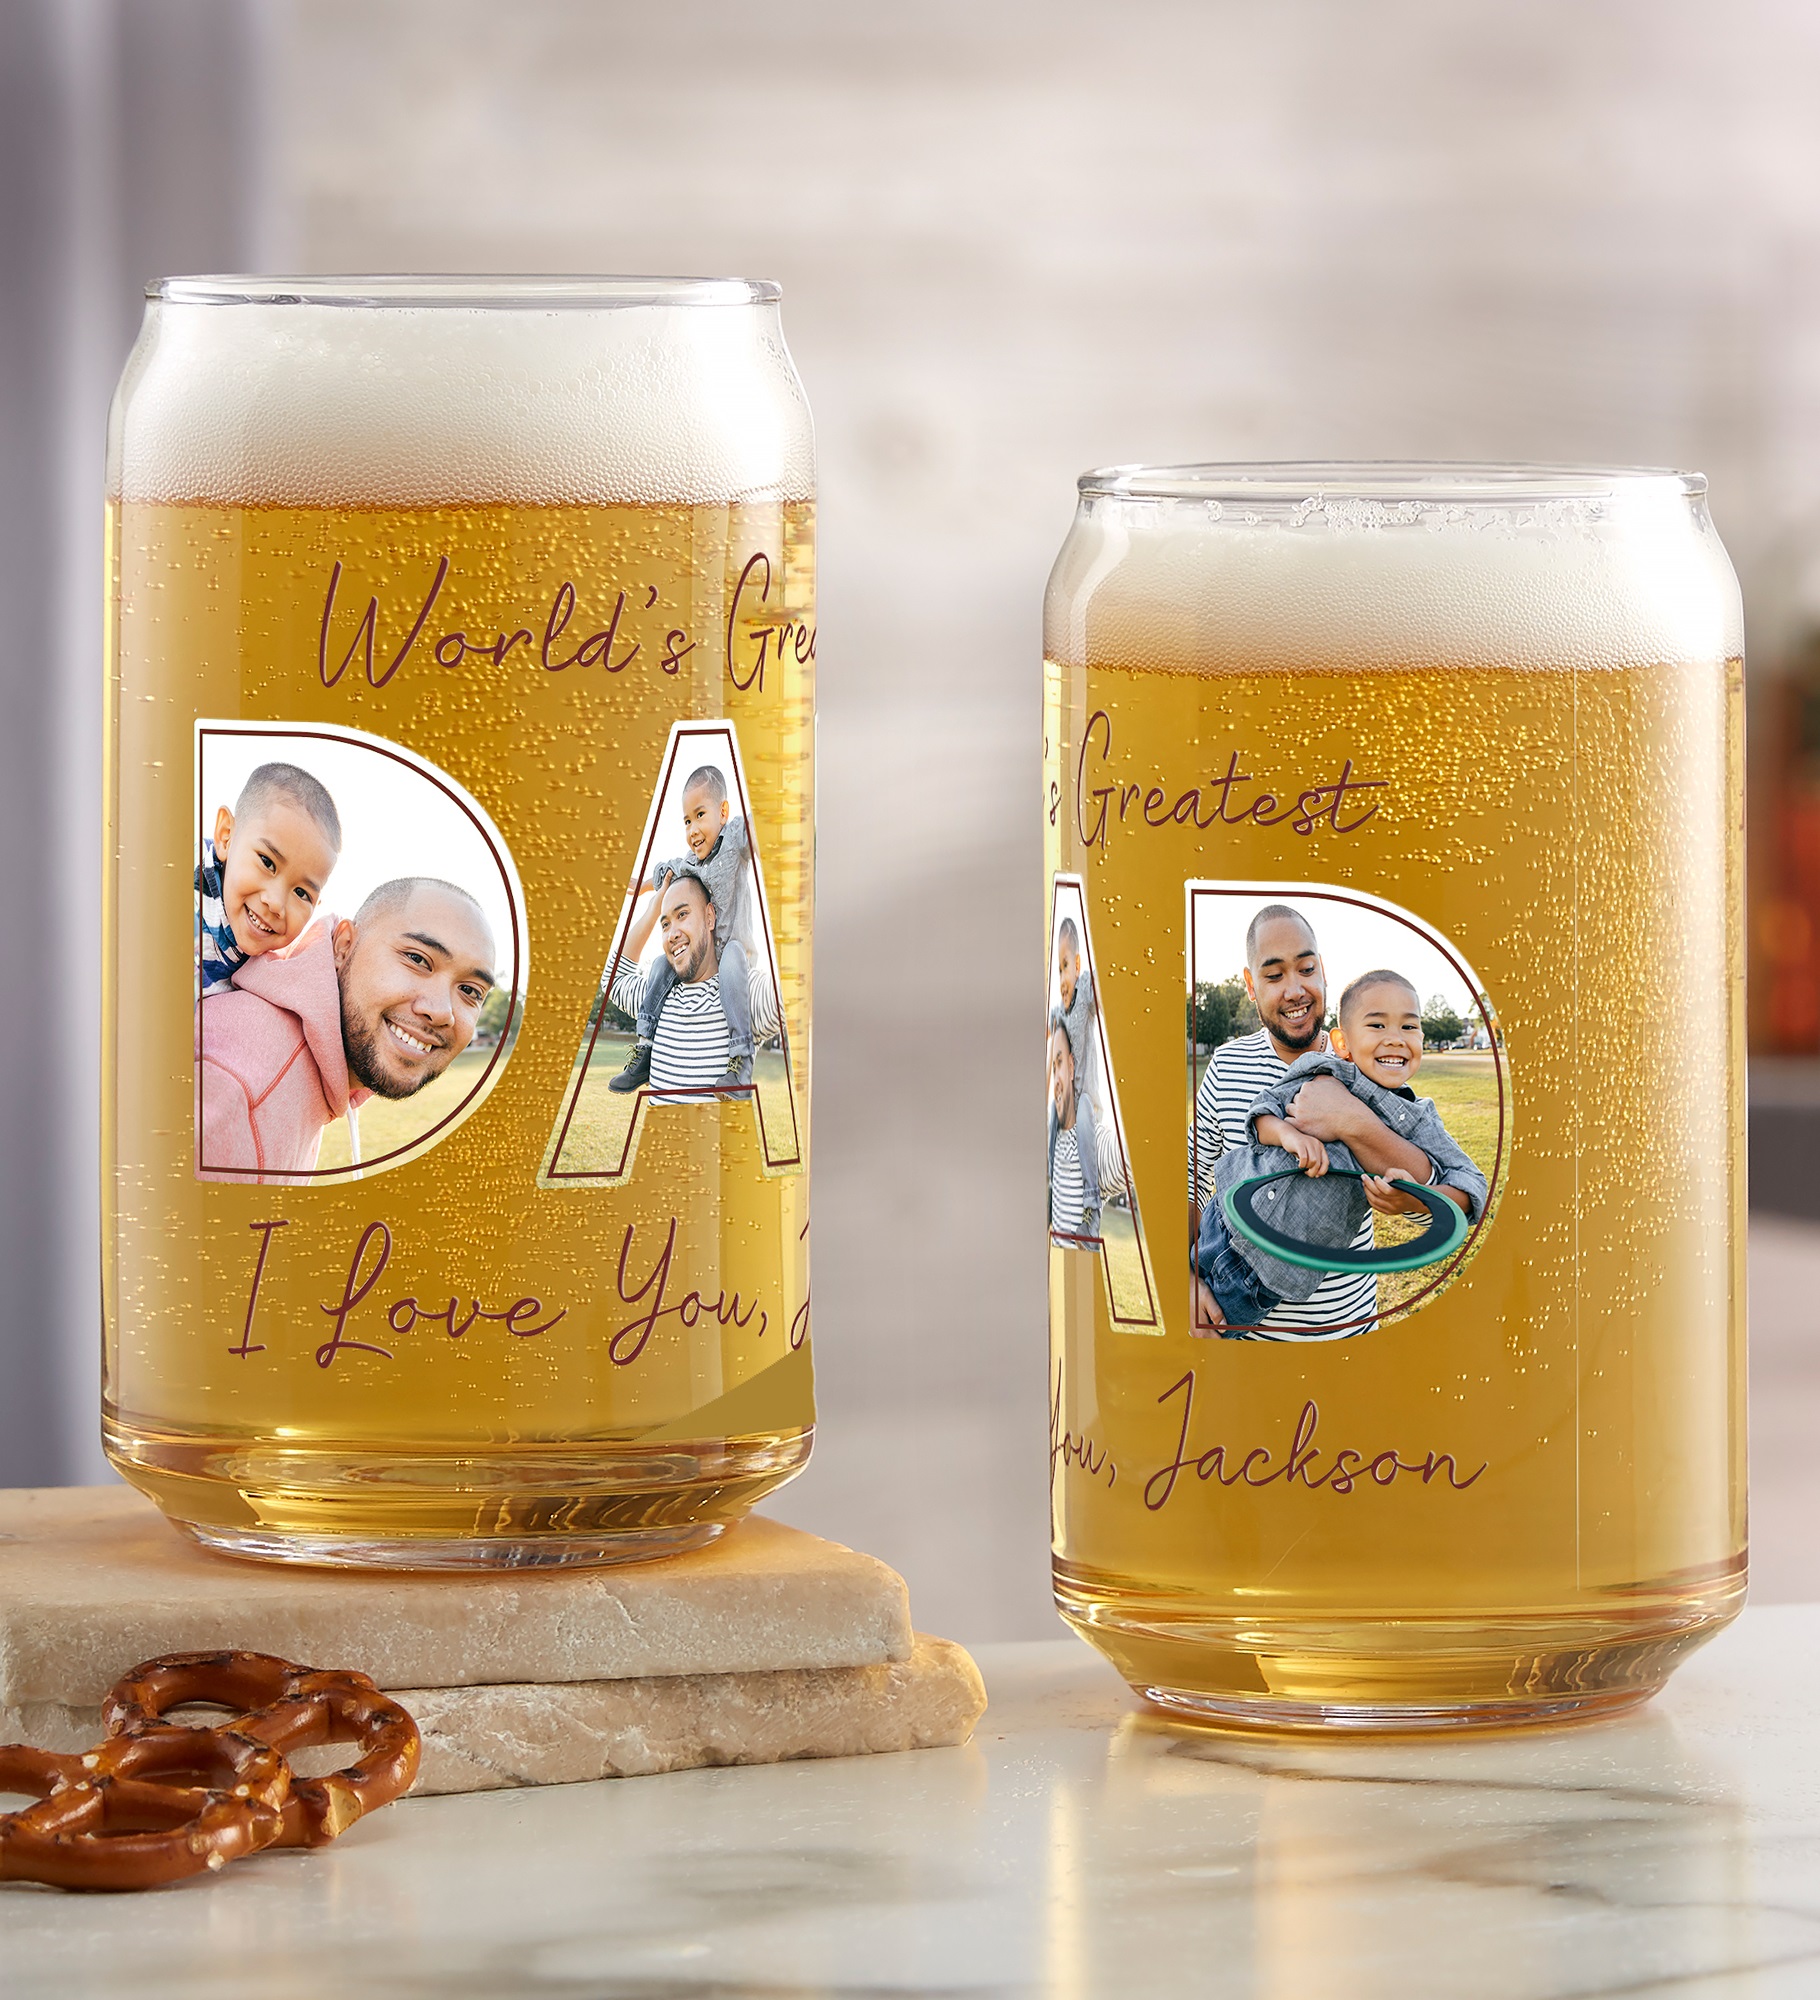 Memories with Dad Personalized Photo Printed Beer Glass